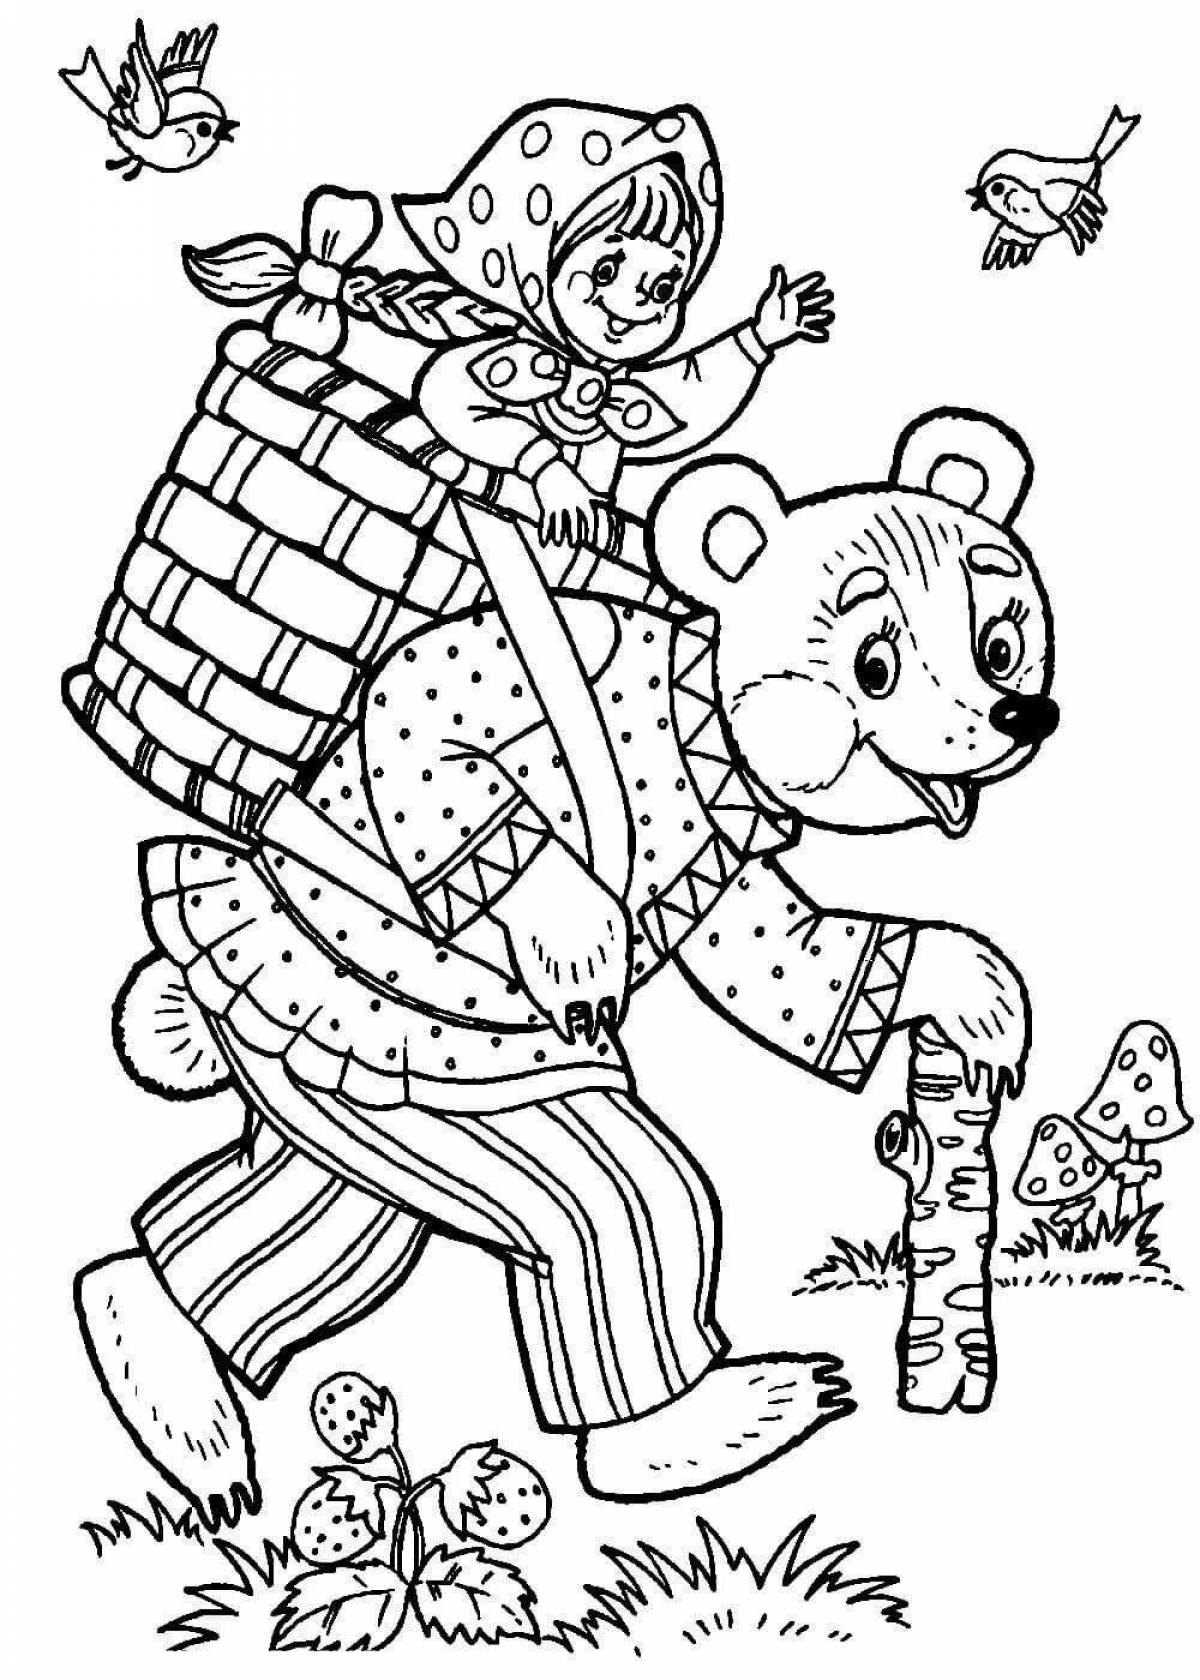 Fantastic fairy tale coloring pages for kids